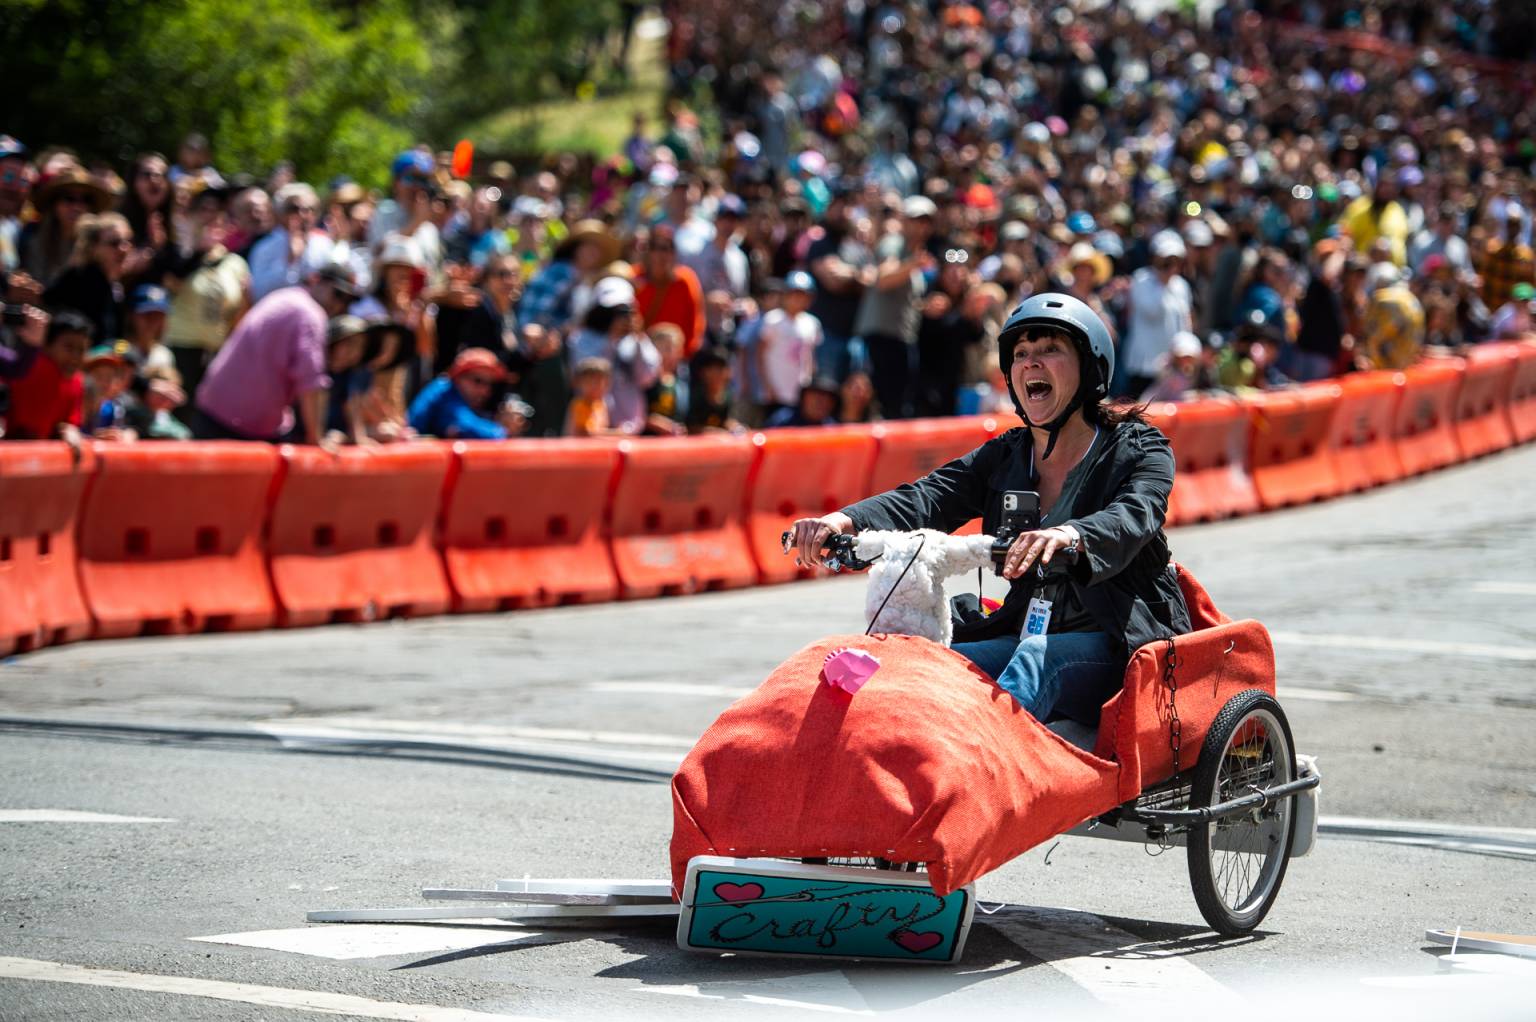 PHOTOS: The Soapbox Derby's Wild Downhill Action in San